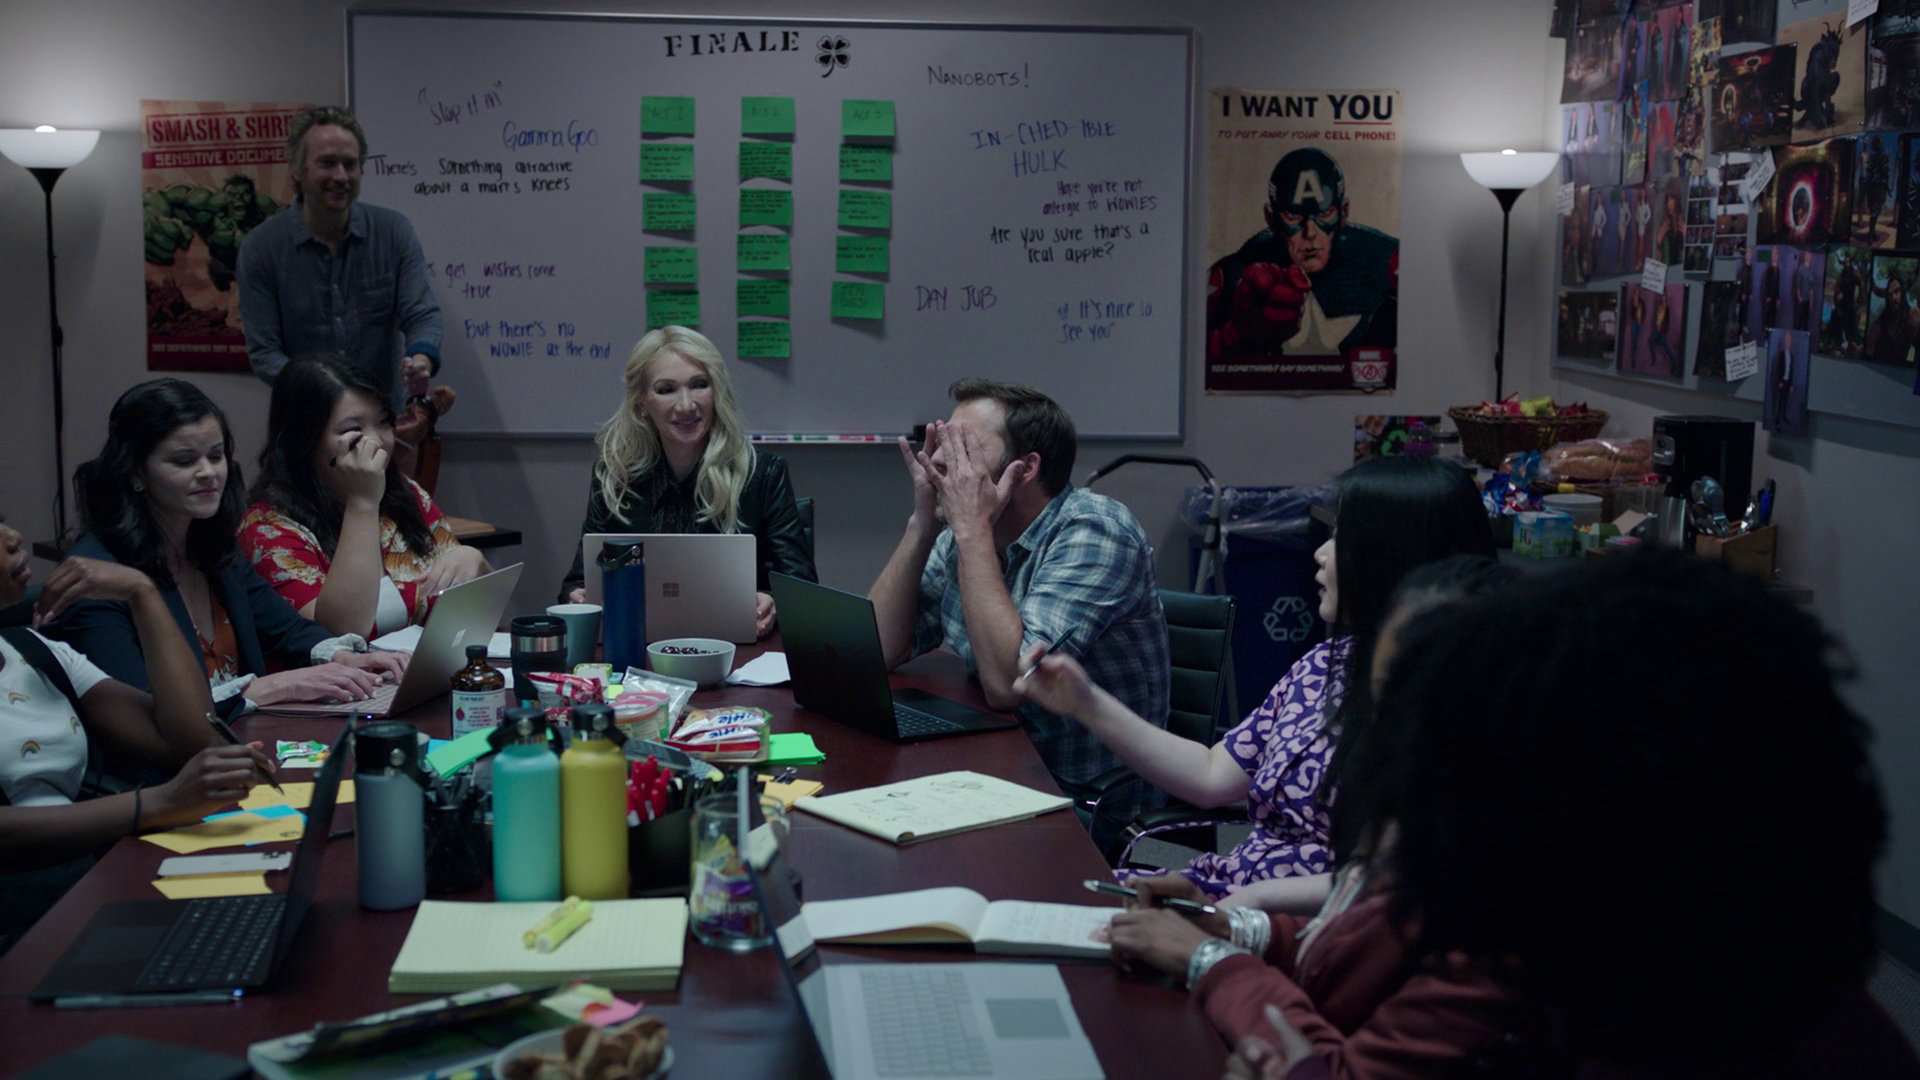 She-Hulk (Tatiana Maslany) visits the series' writer room in She-Hulk: Attorney at Law Season 1 Episode 9 "Whose Show Is This?" (2022), Marvel Entertainment via Disney Plus